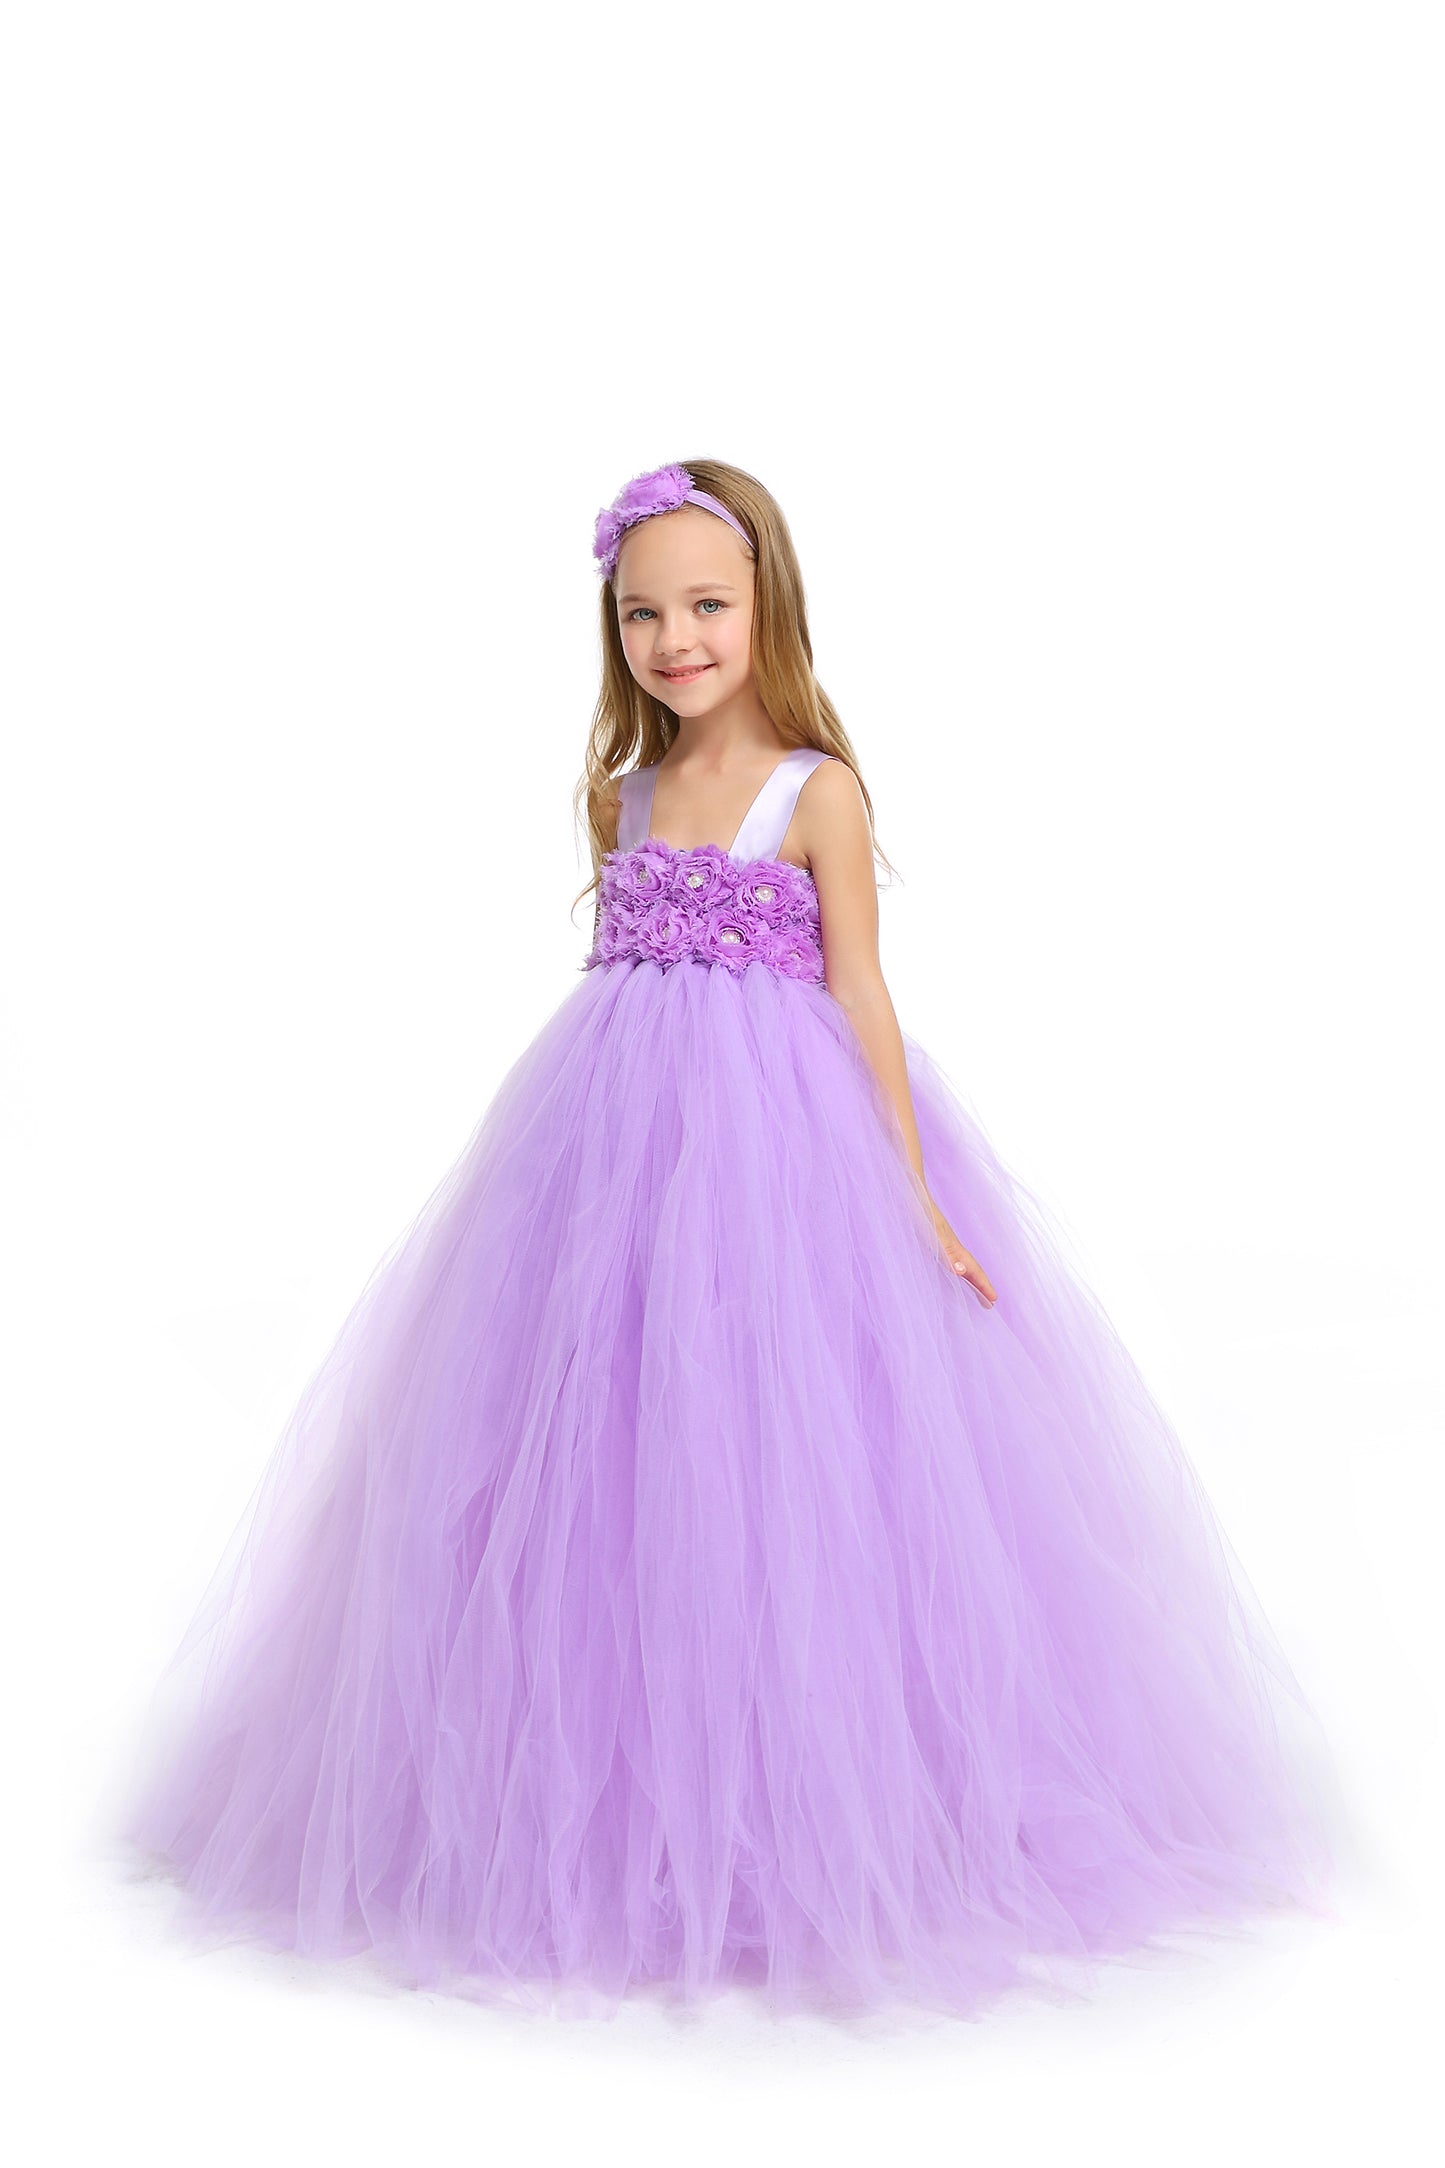 MagicTulleCouture Lavender/Lilac Flower Girl Tutu Dress with Matching Headpiece and Slip